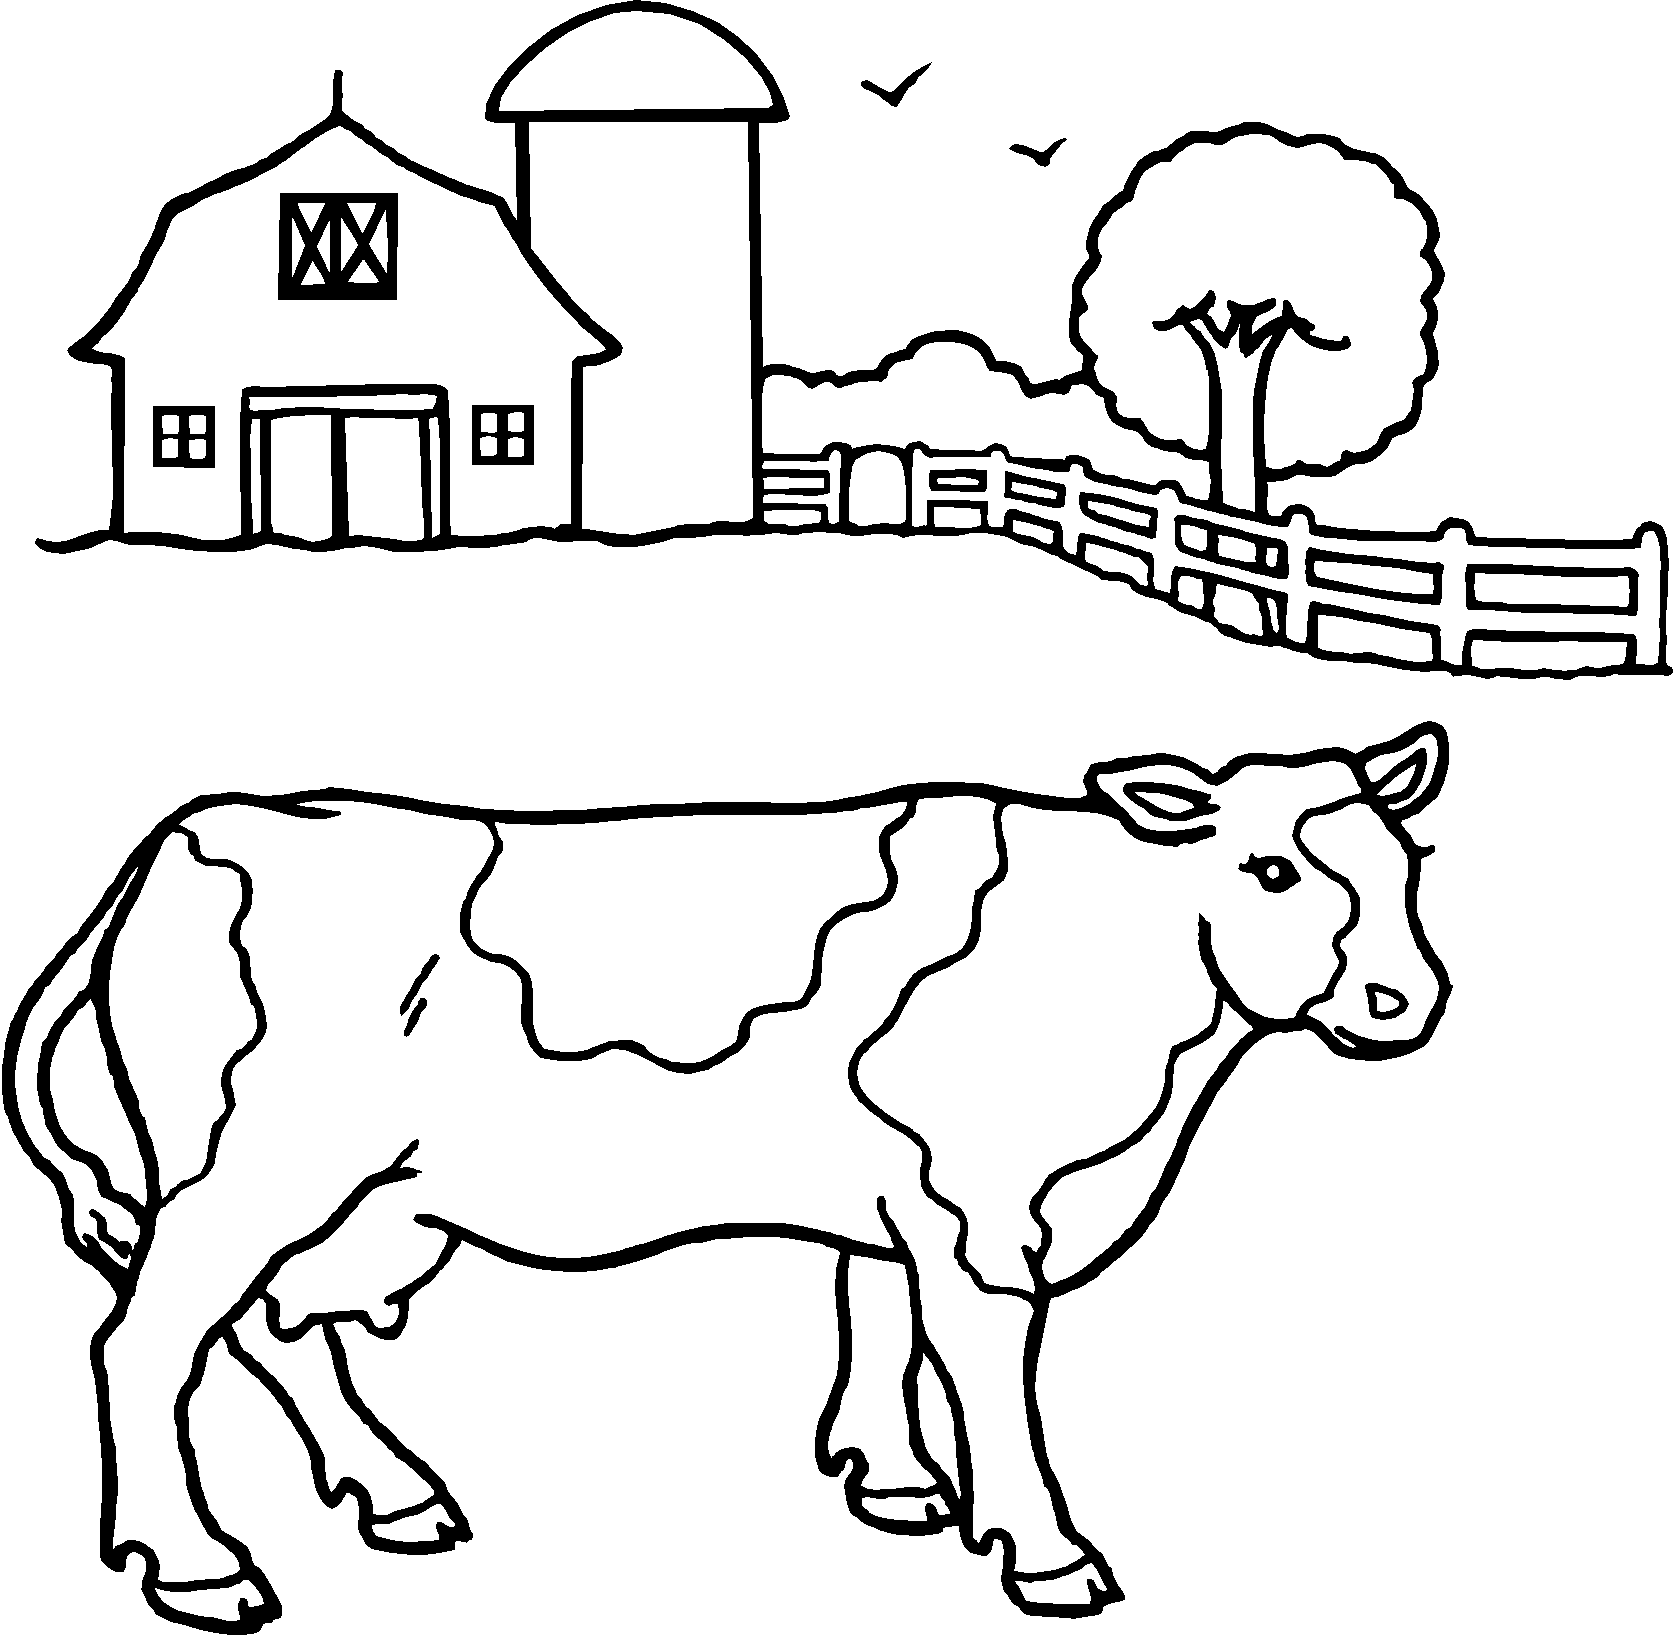 Cow coloring #12, Download drawings